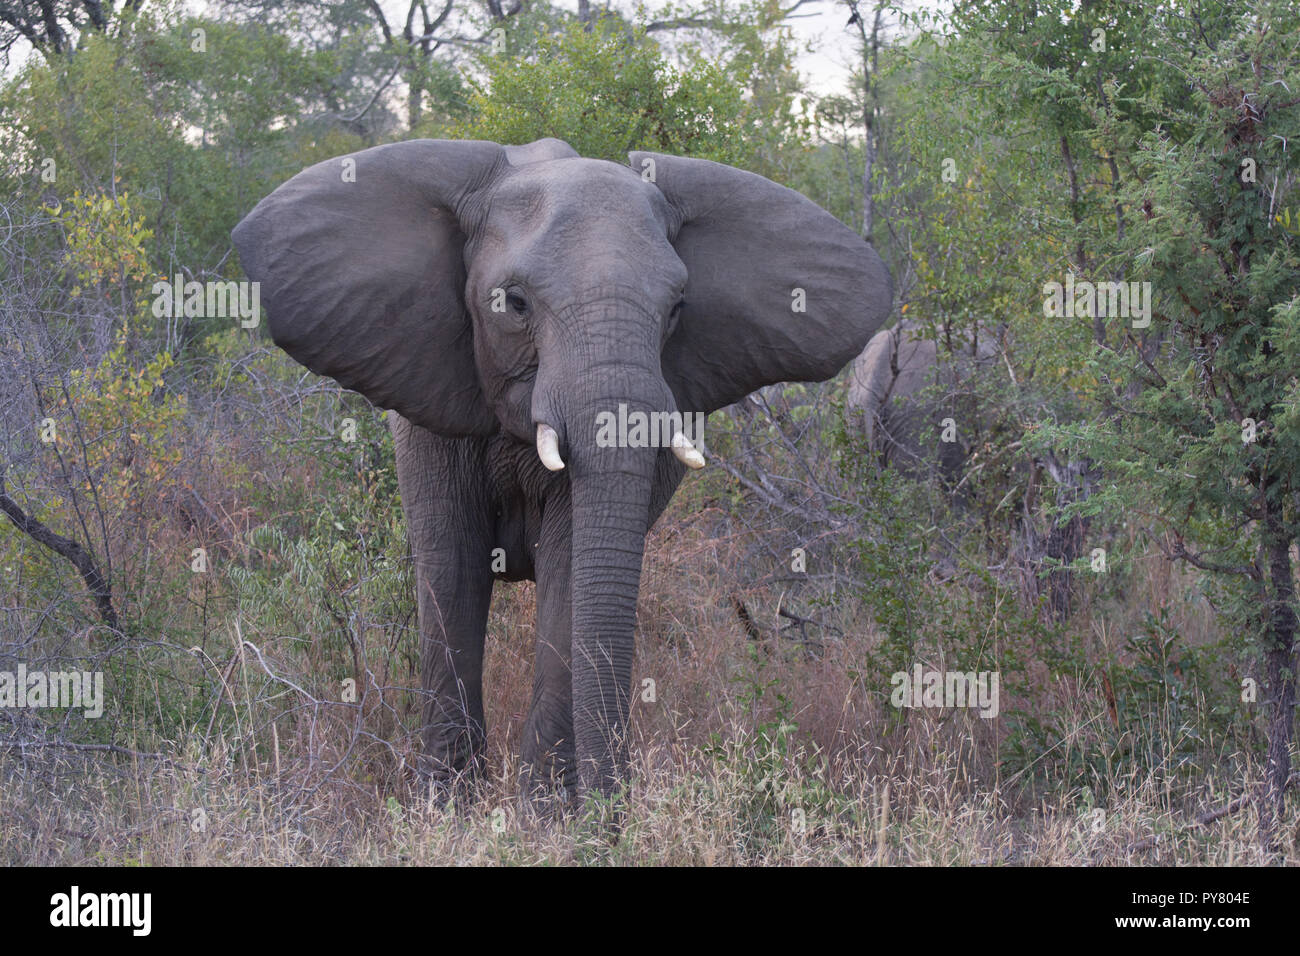 Young African elephant (Loxodonta africana) emerges from tress and approaches camera in the Sabi Sands, Greater Kruger, South Africa Stock Photo